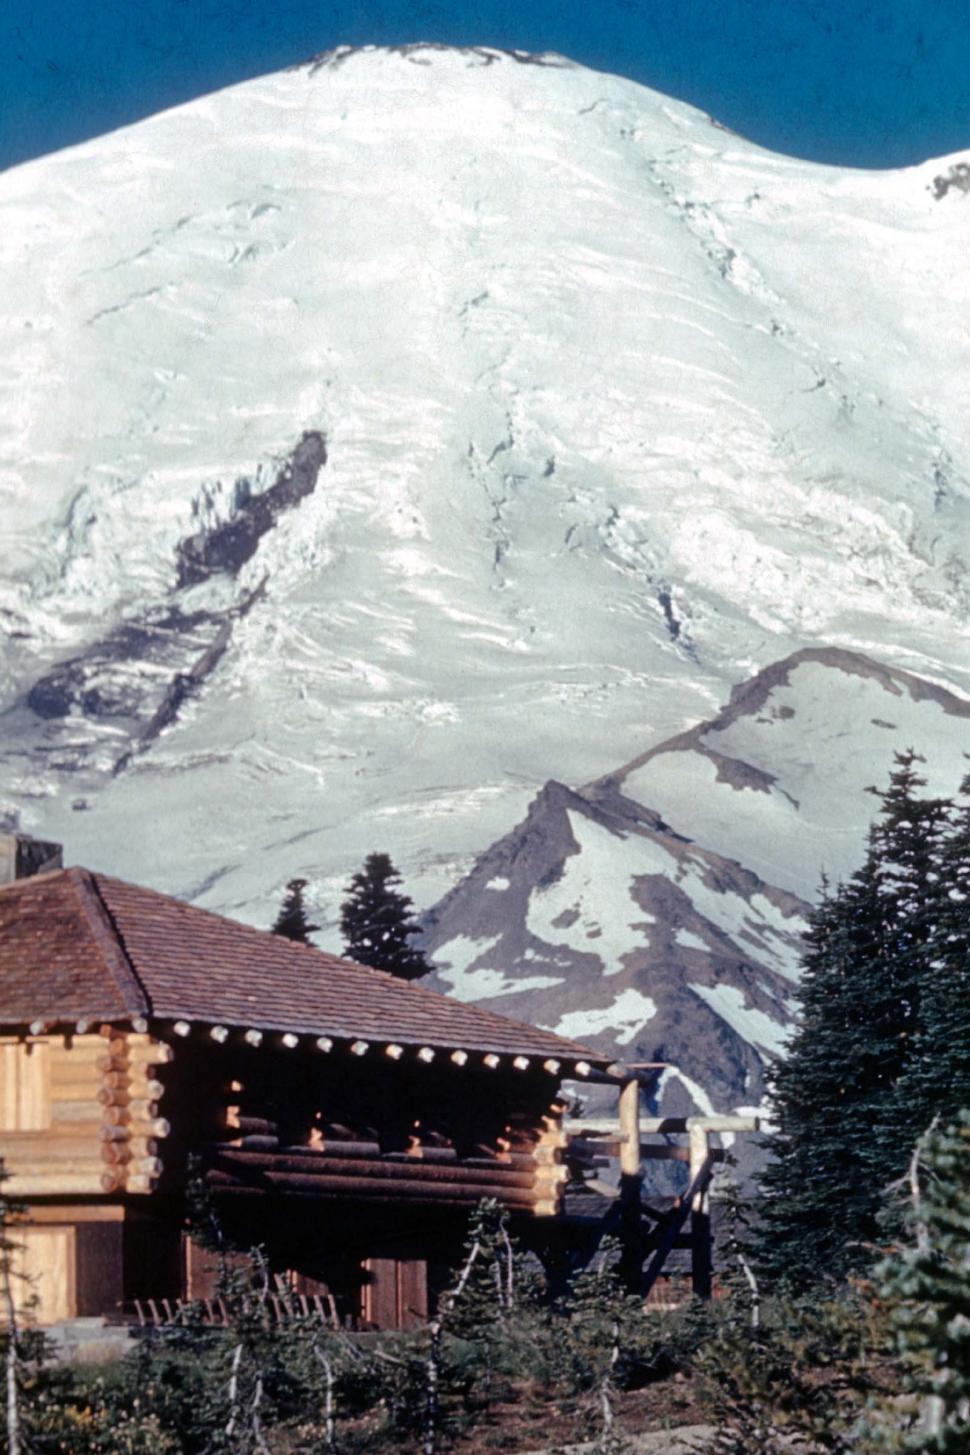 Free Image of landscapes vintage photo snow FACAT001 mountain vintage photograph log house lodge buildings cold winter snowy snow covered peak ski skiing 